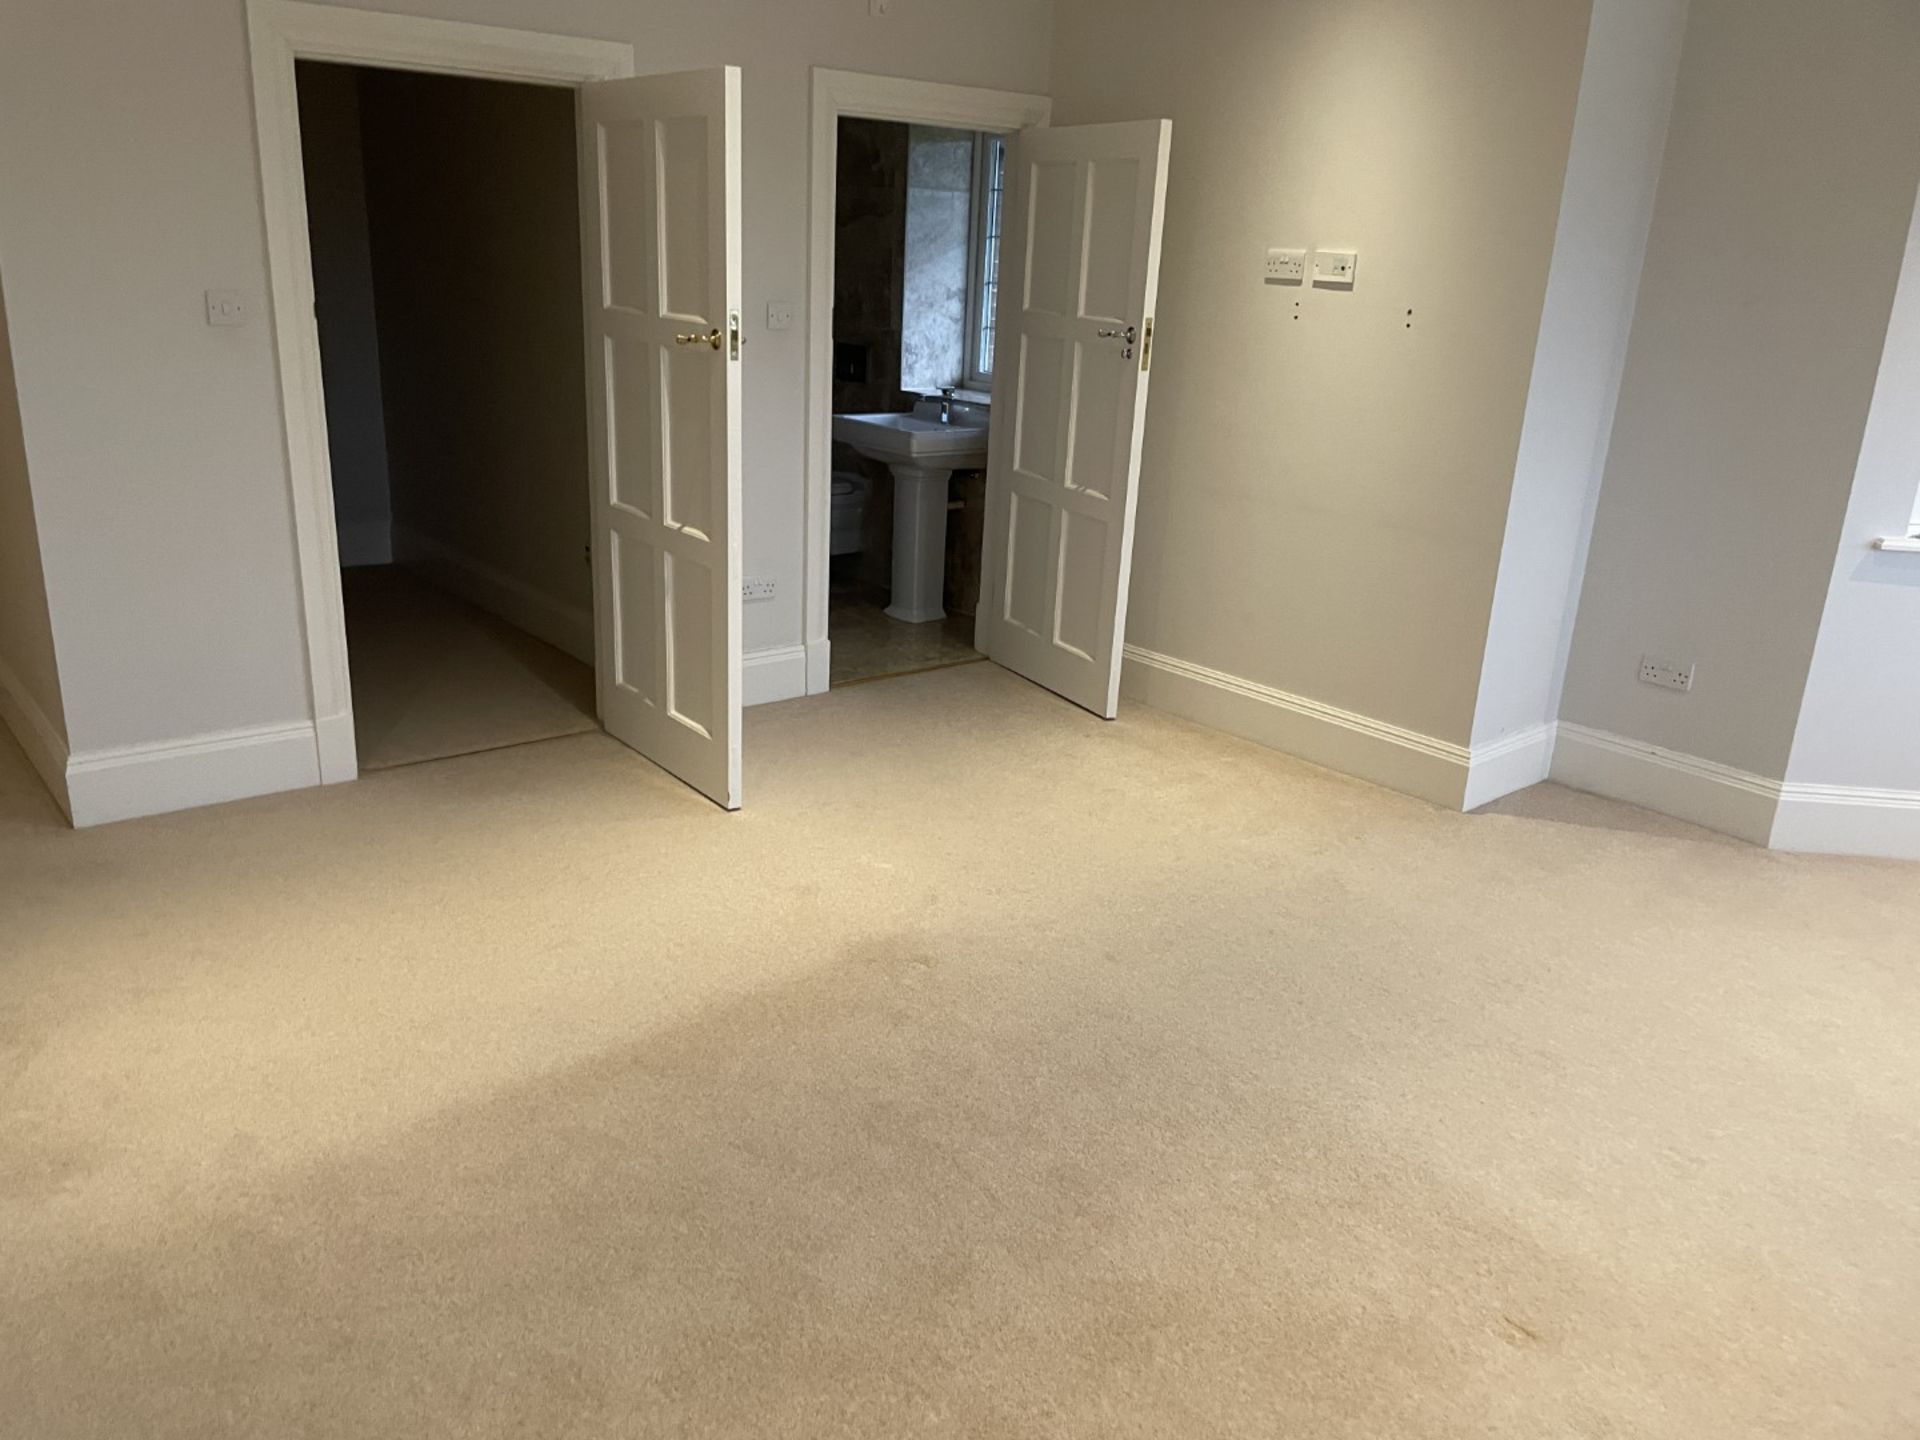 1 x Luxury Wool Back Bedroom Carpet in a Neutral Tone with Premium Underlay - Image 12 of 16